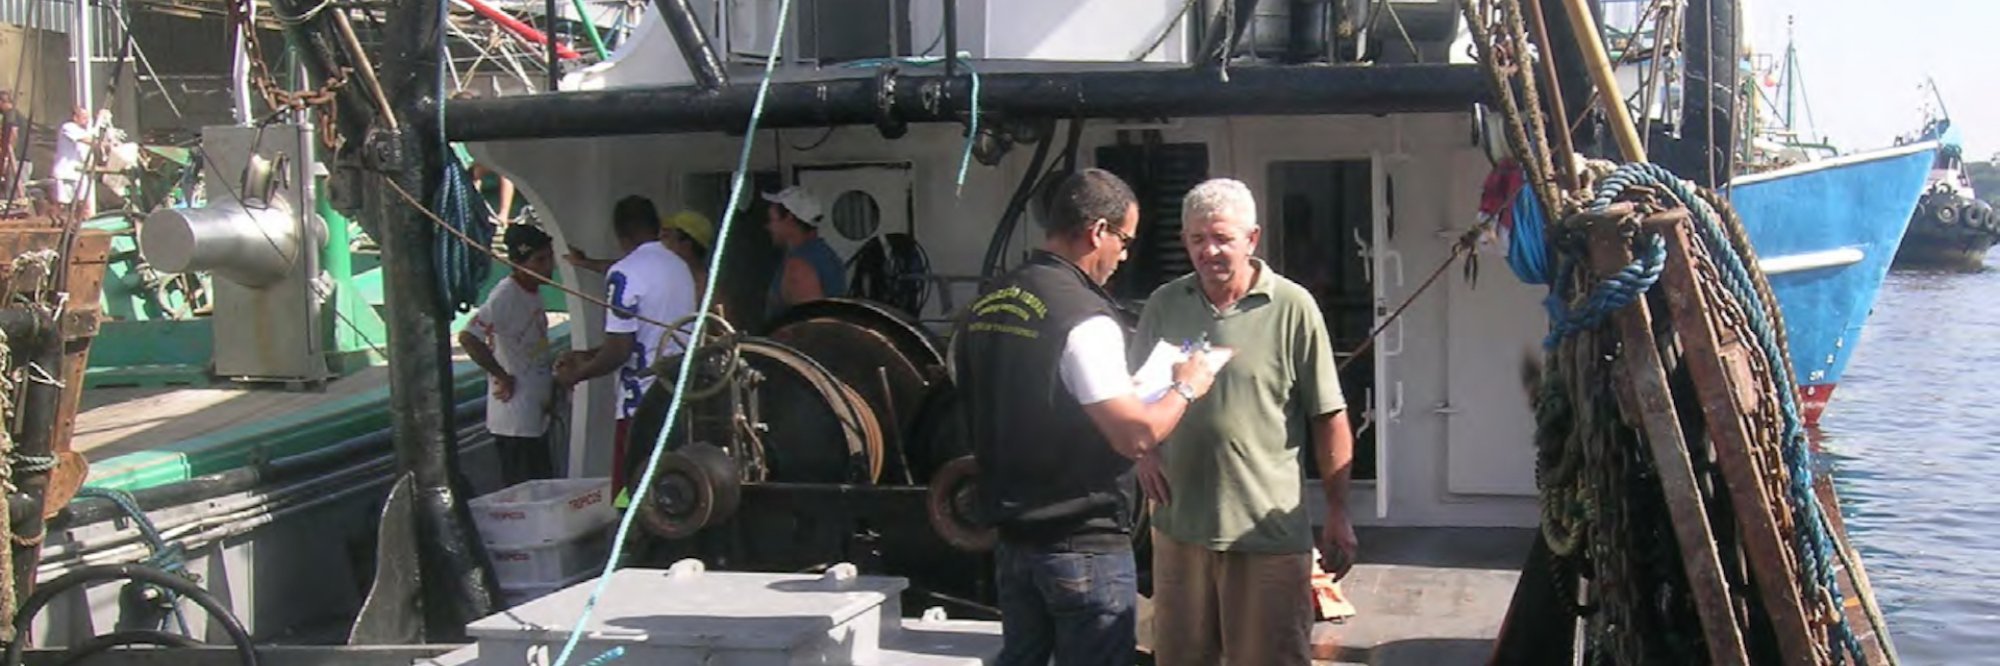 Inspection of labour conditions on board fishing vessels